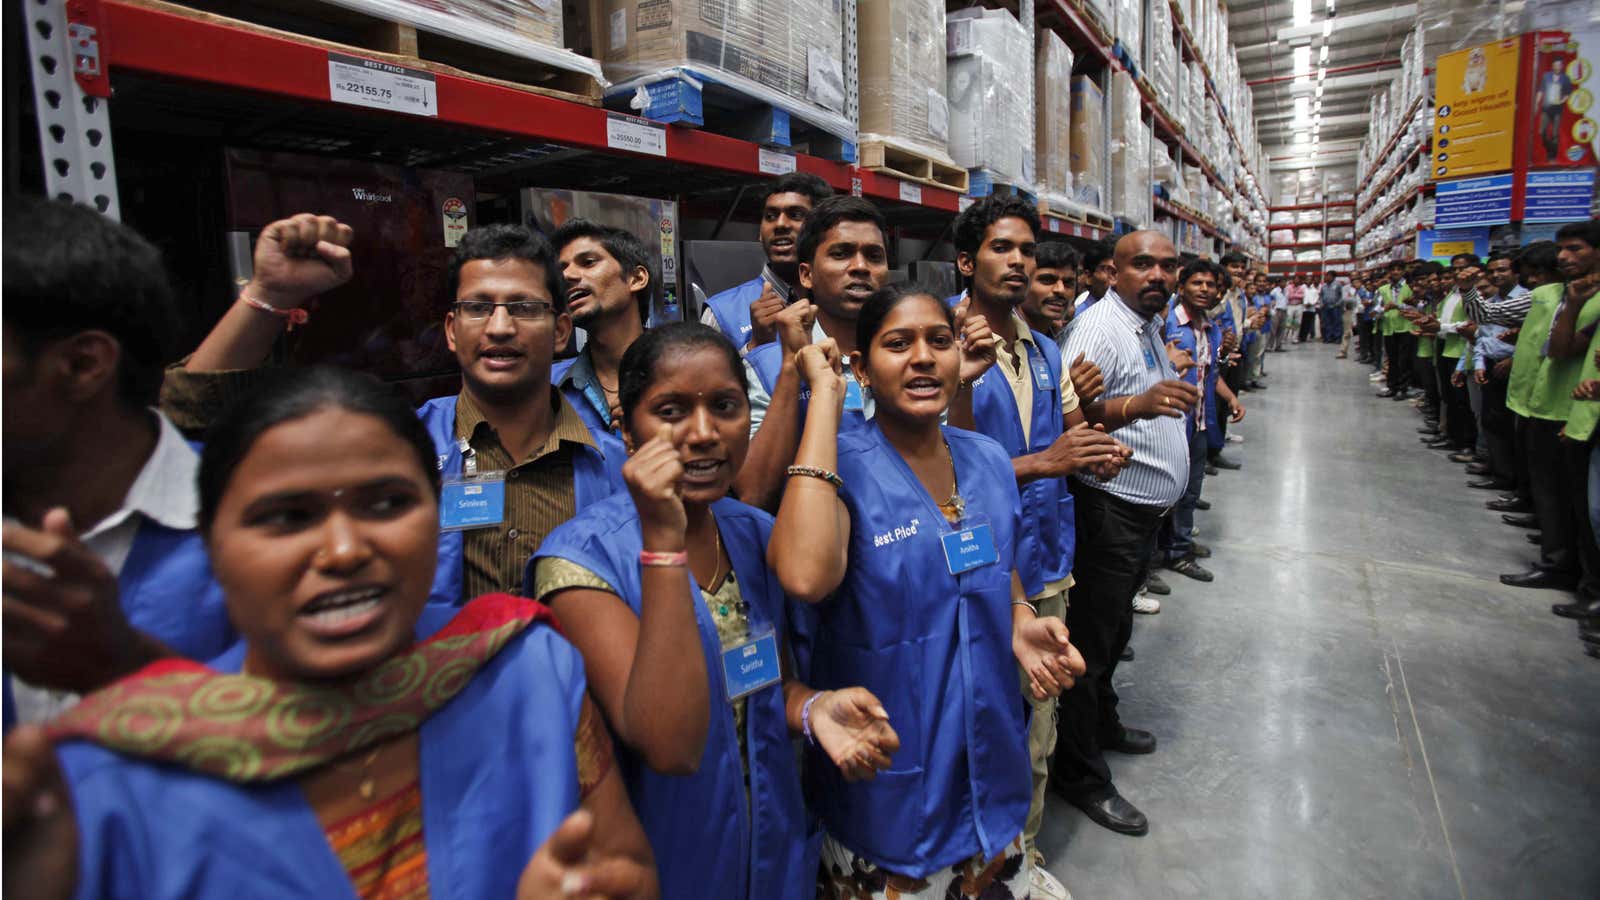 Striking Wal-Mart workers in the US could impact their colleagues in India, where Wal-Mart is set to expand.